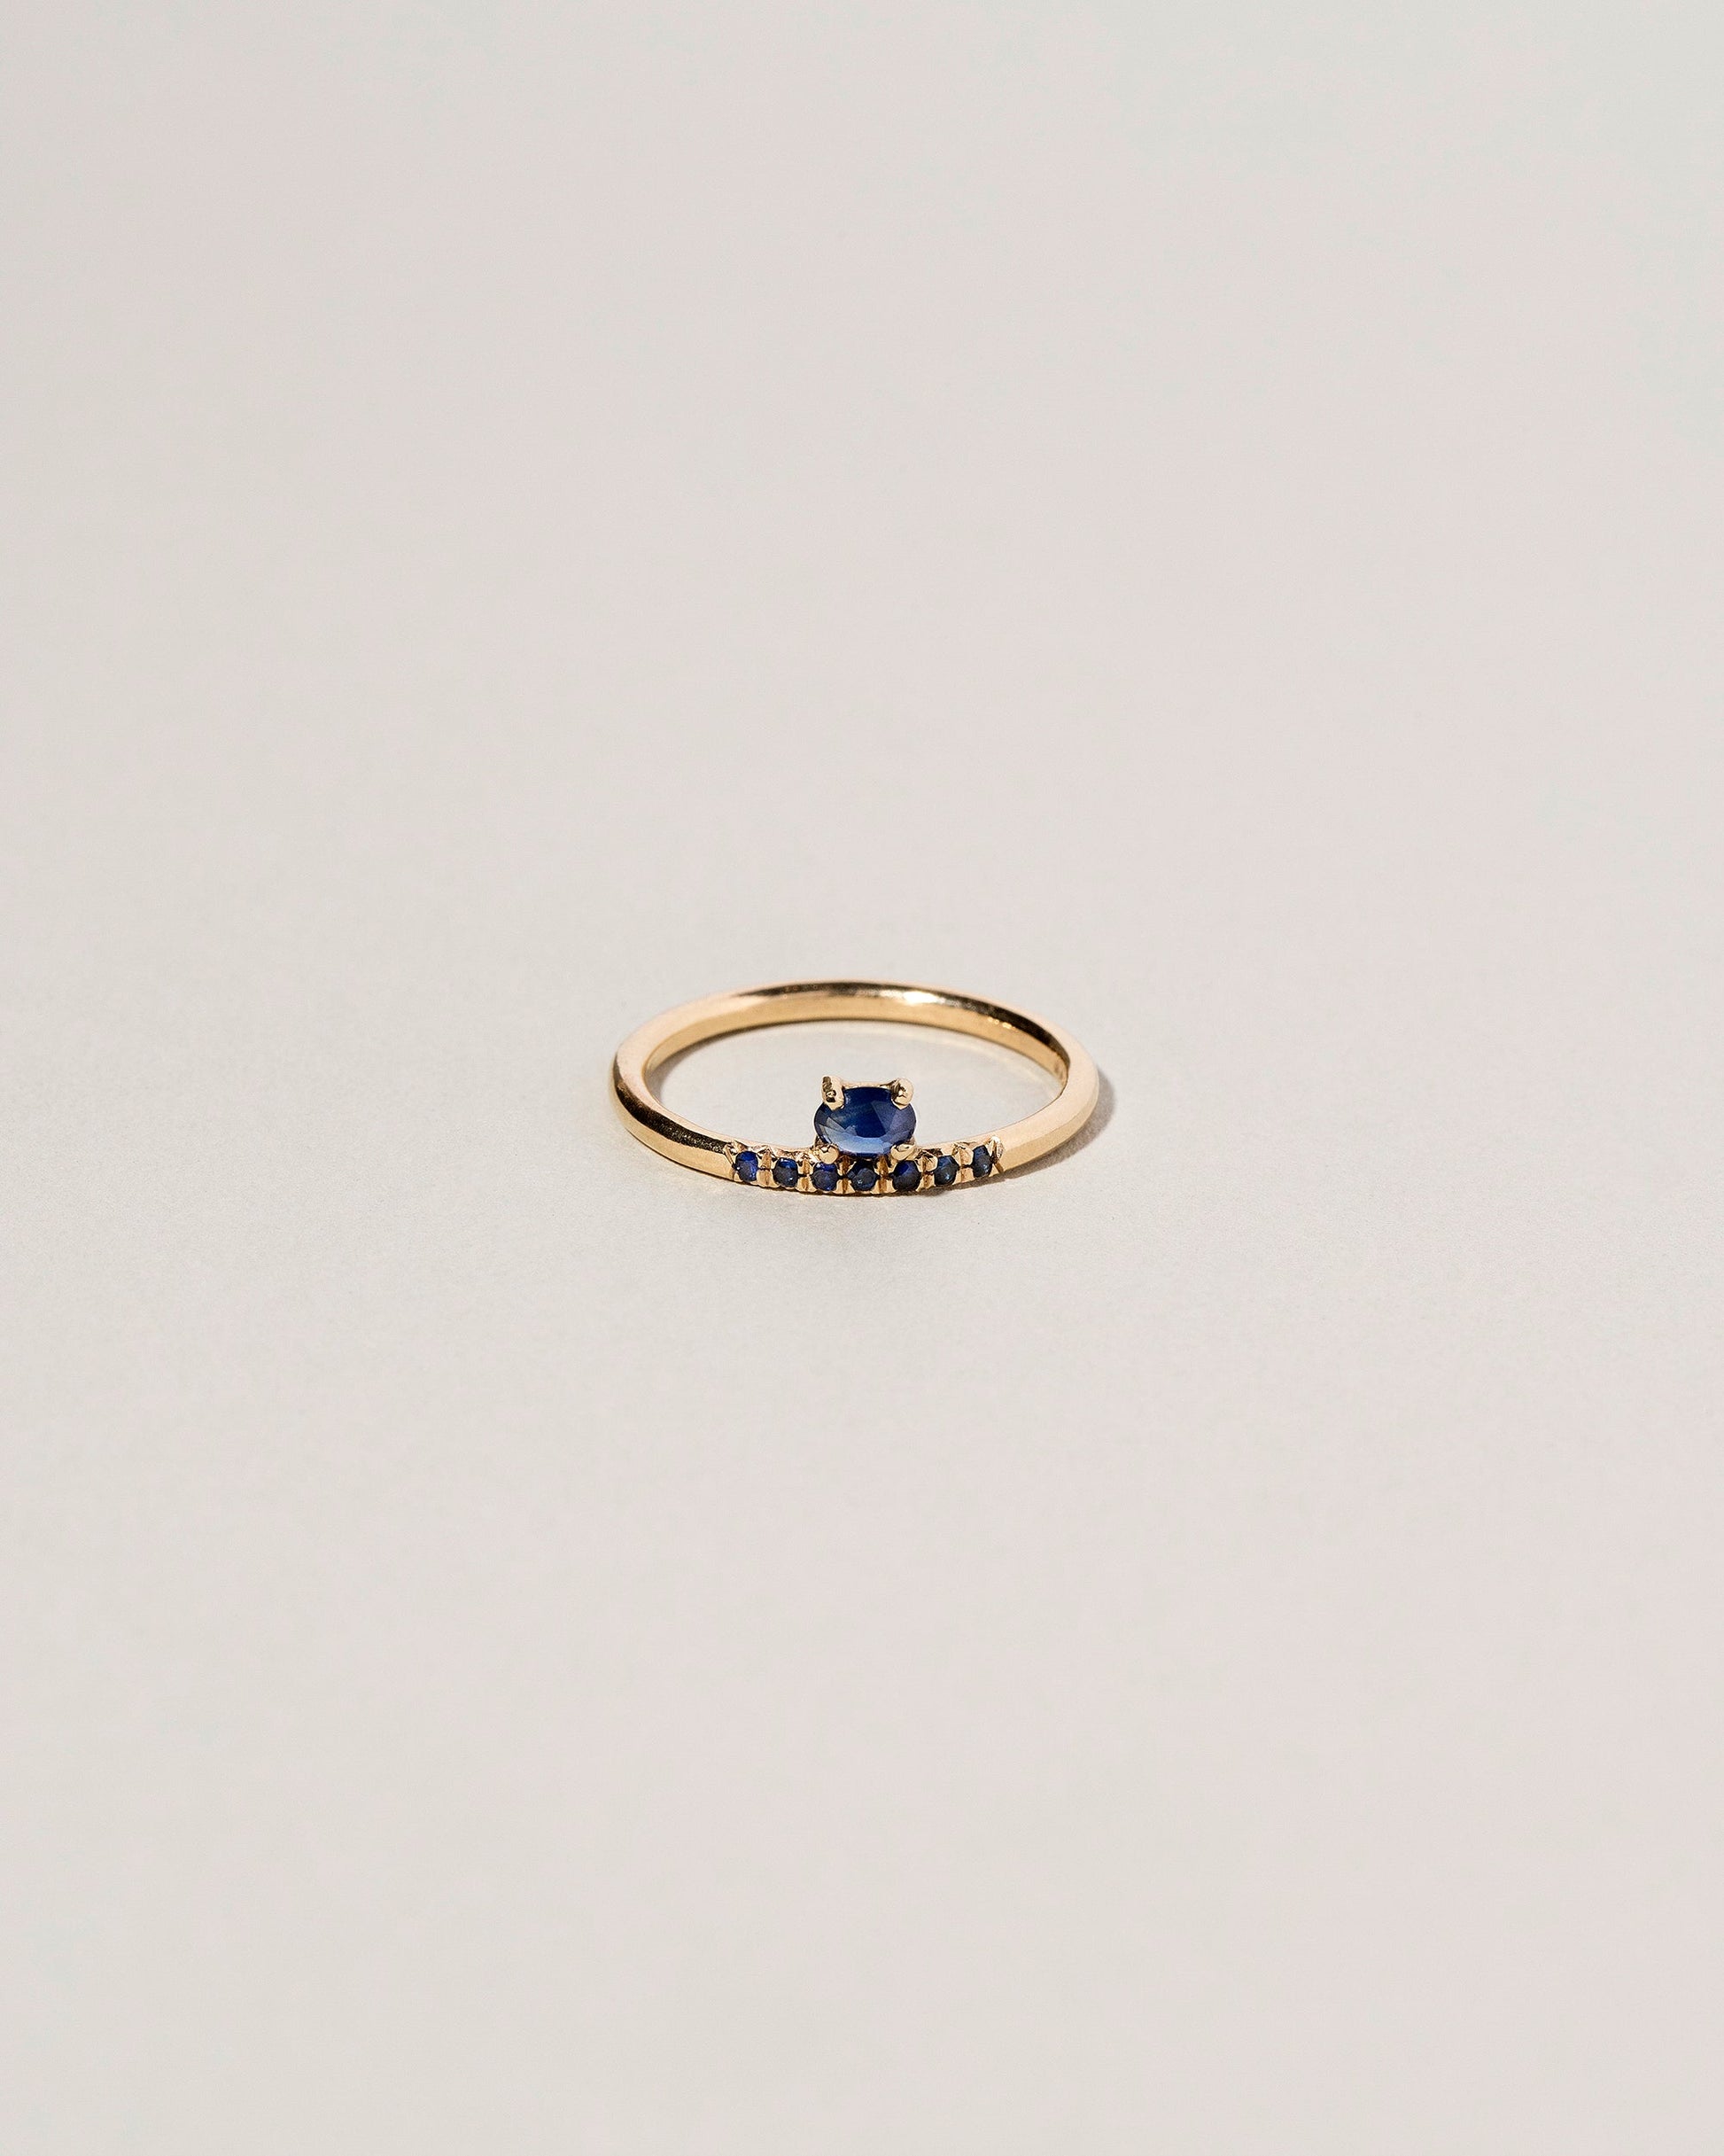  Stacked Ring - Sapphire & Black Diamond on light color background.